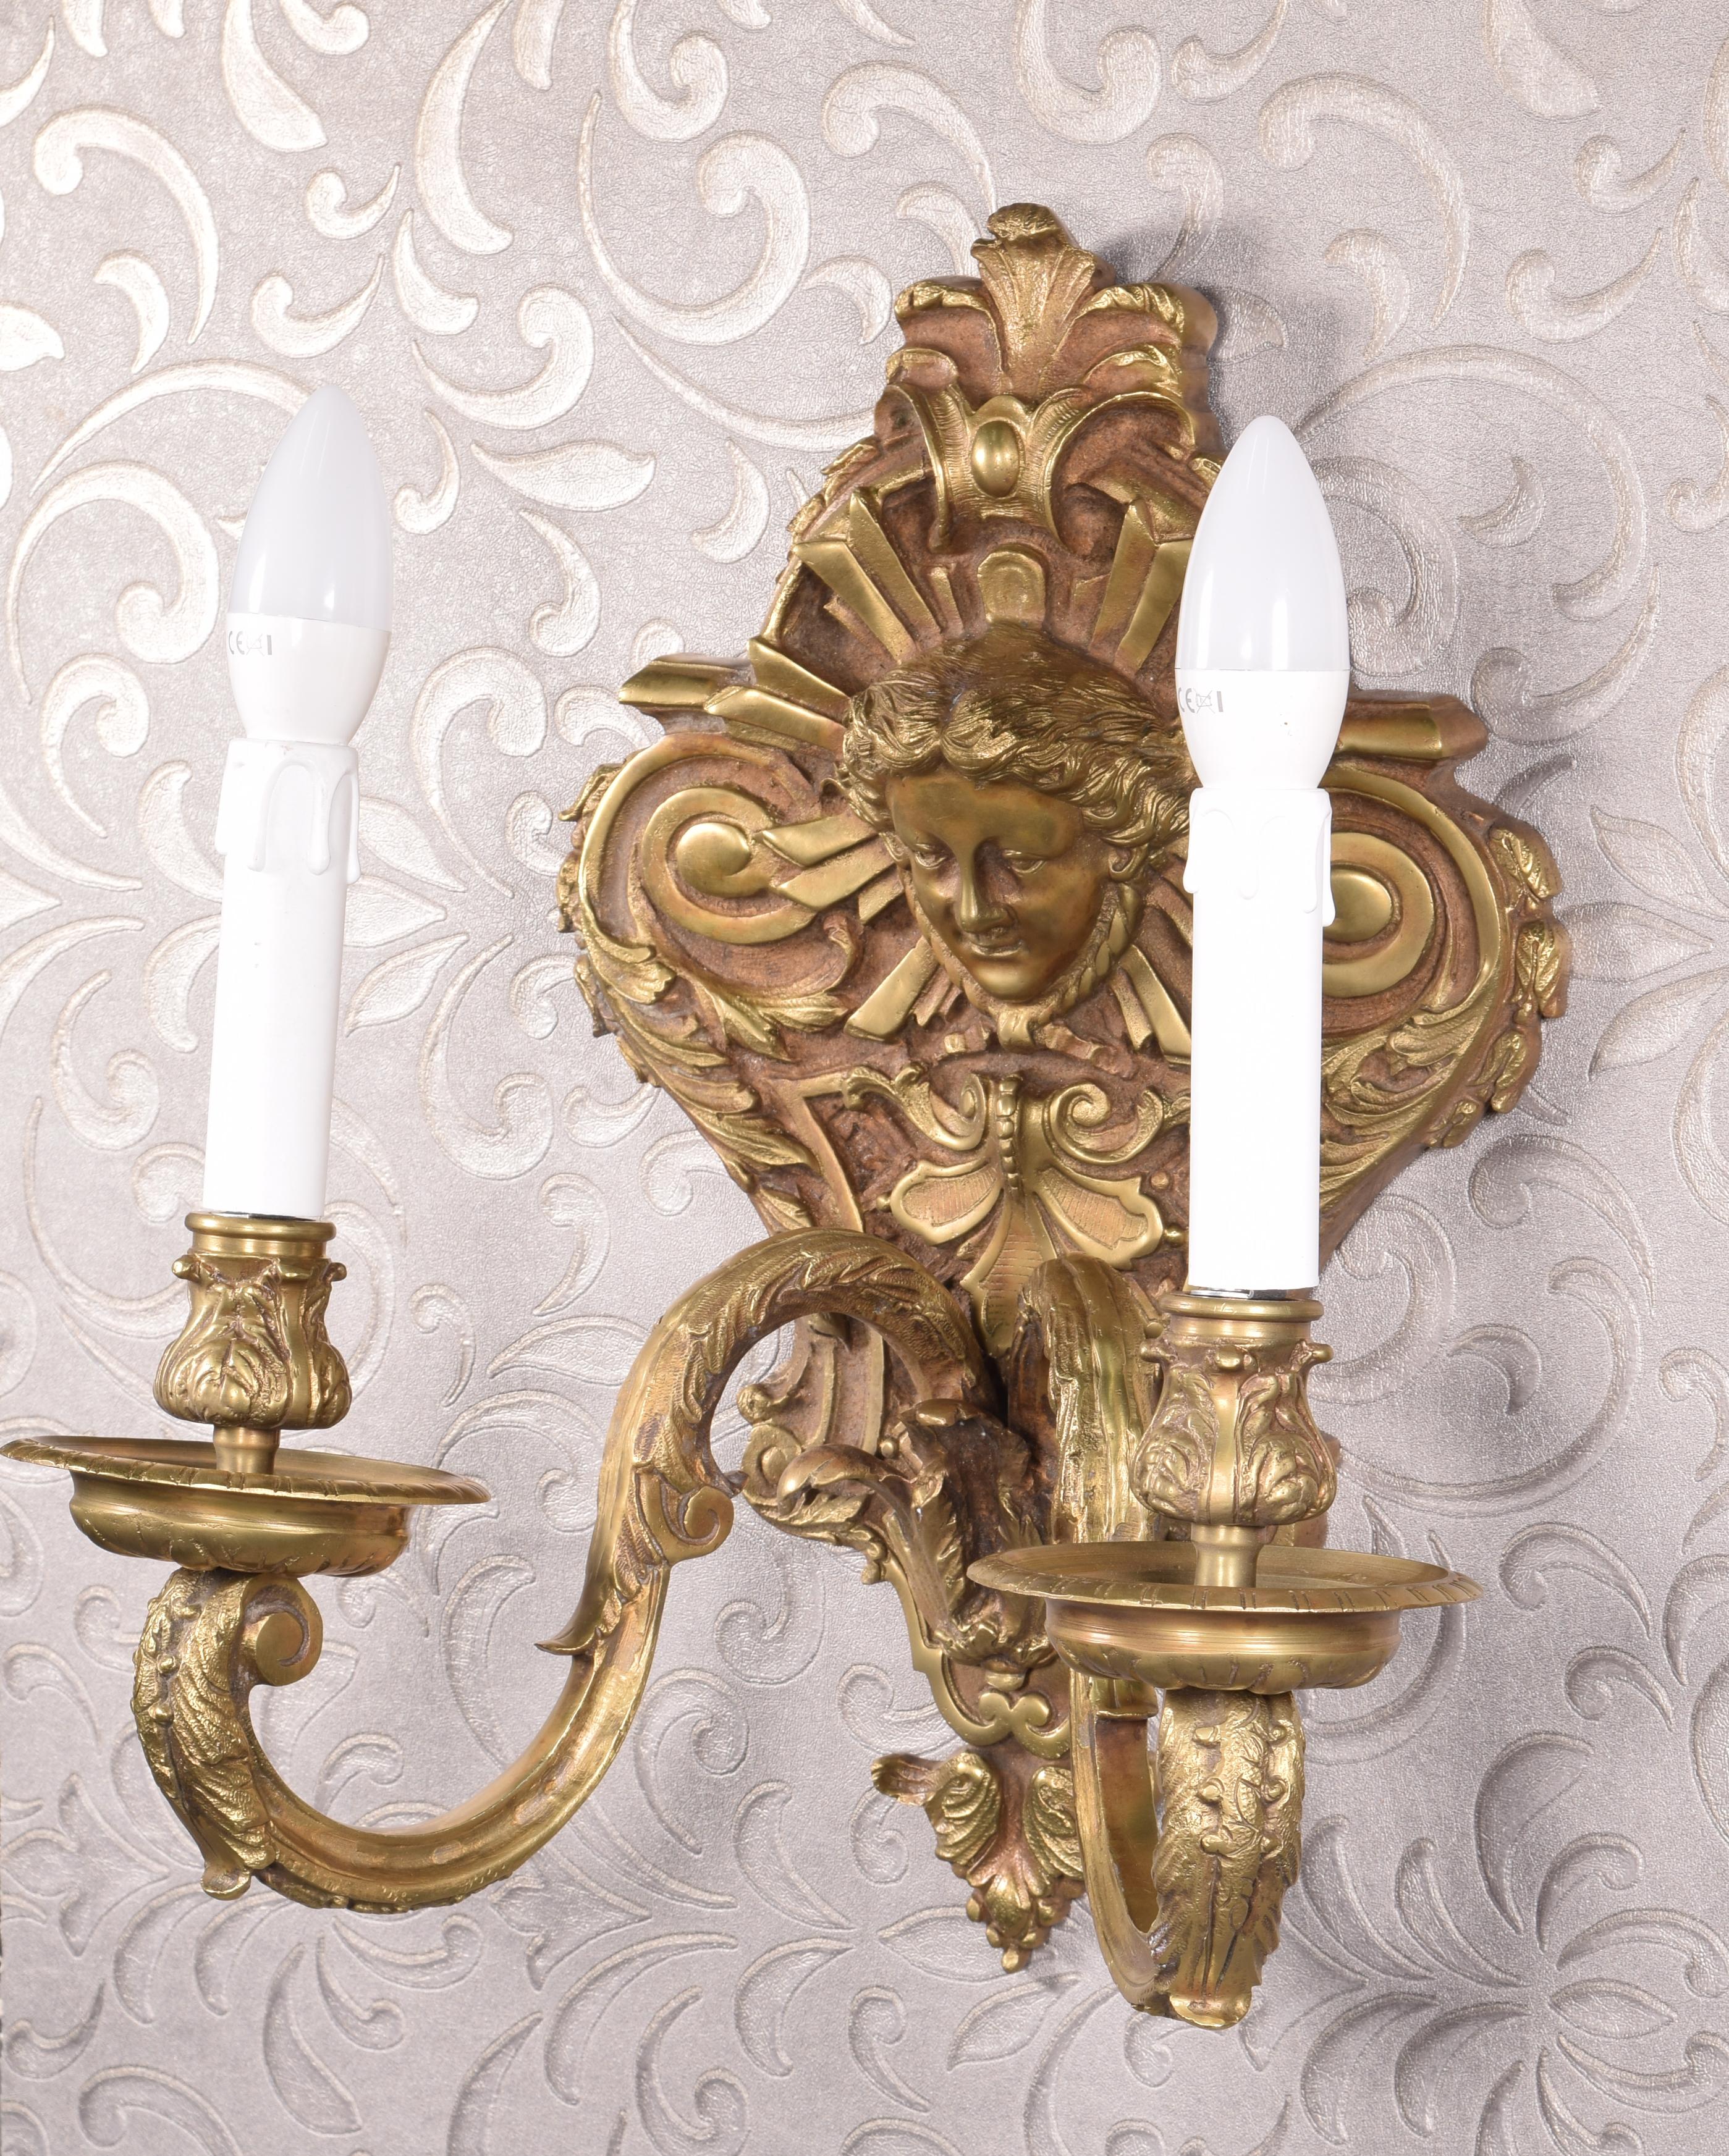 Wall lamp. Bronze.
Wall sconce with two lights  decorated with figurative, vegetal and architectural architectural elements inspired by certain 19th-century Rococo 19th century Rococo souvenirs.
Weight: 13,5 kg
- Measurements: 33x23x40 cms